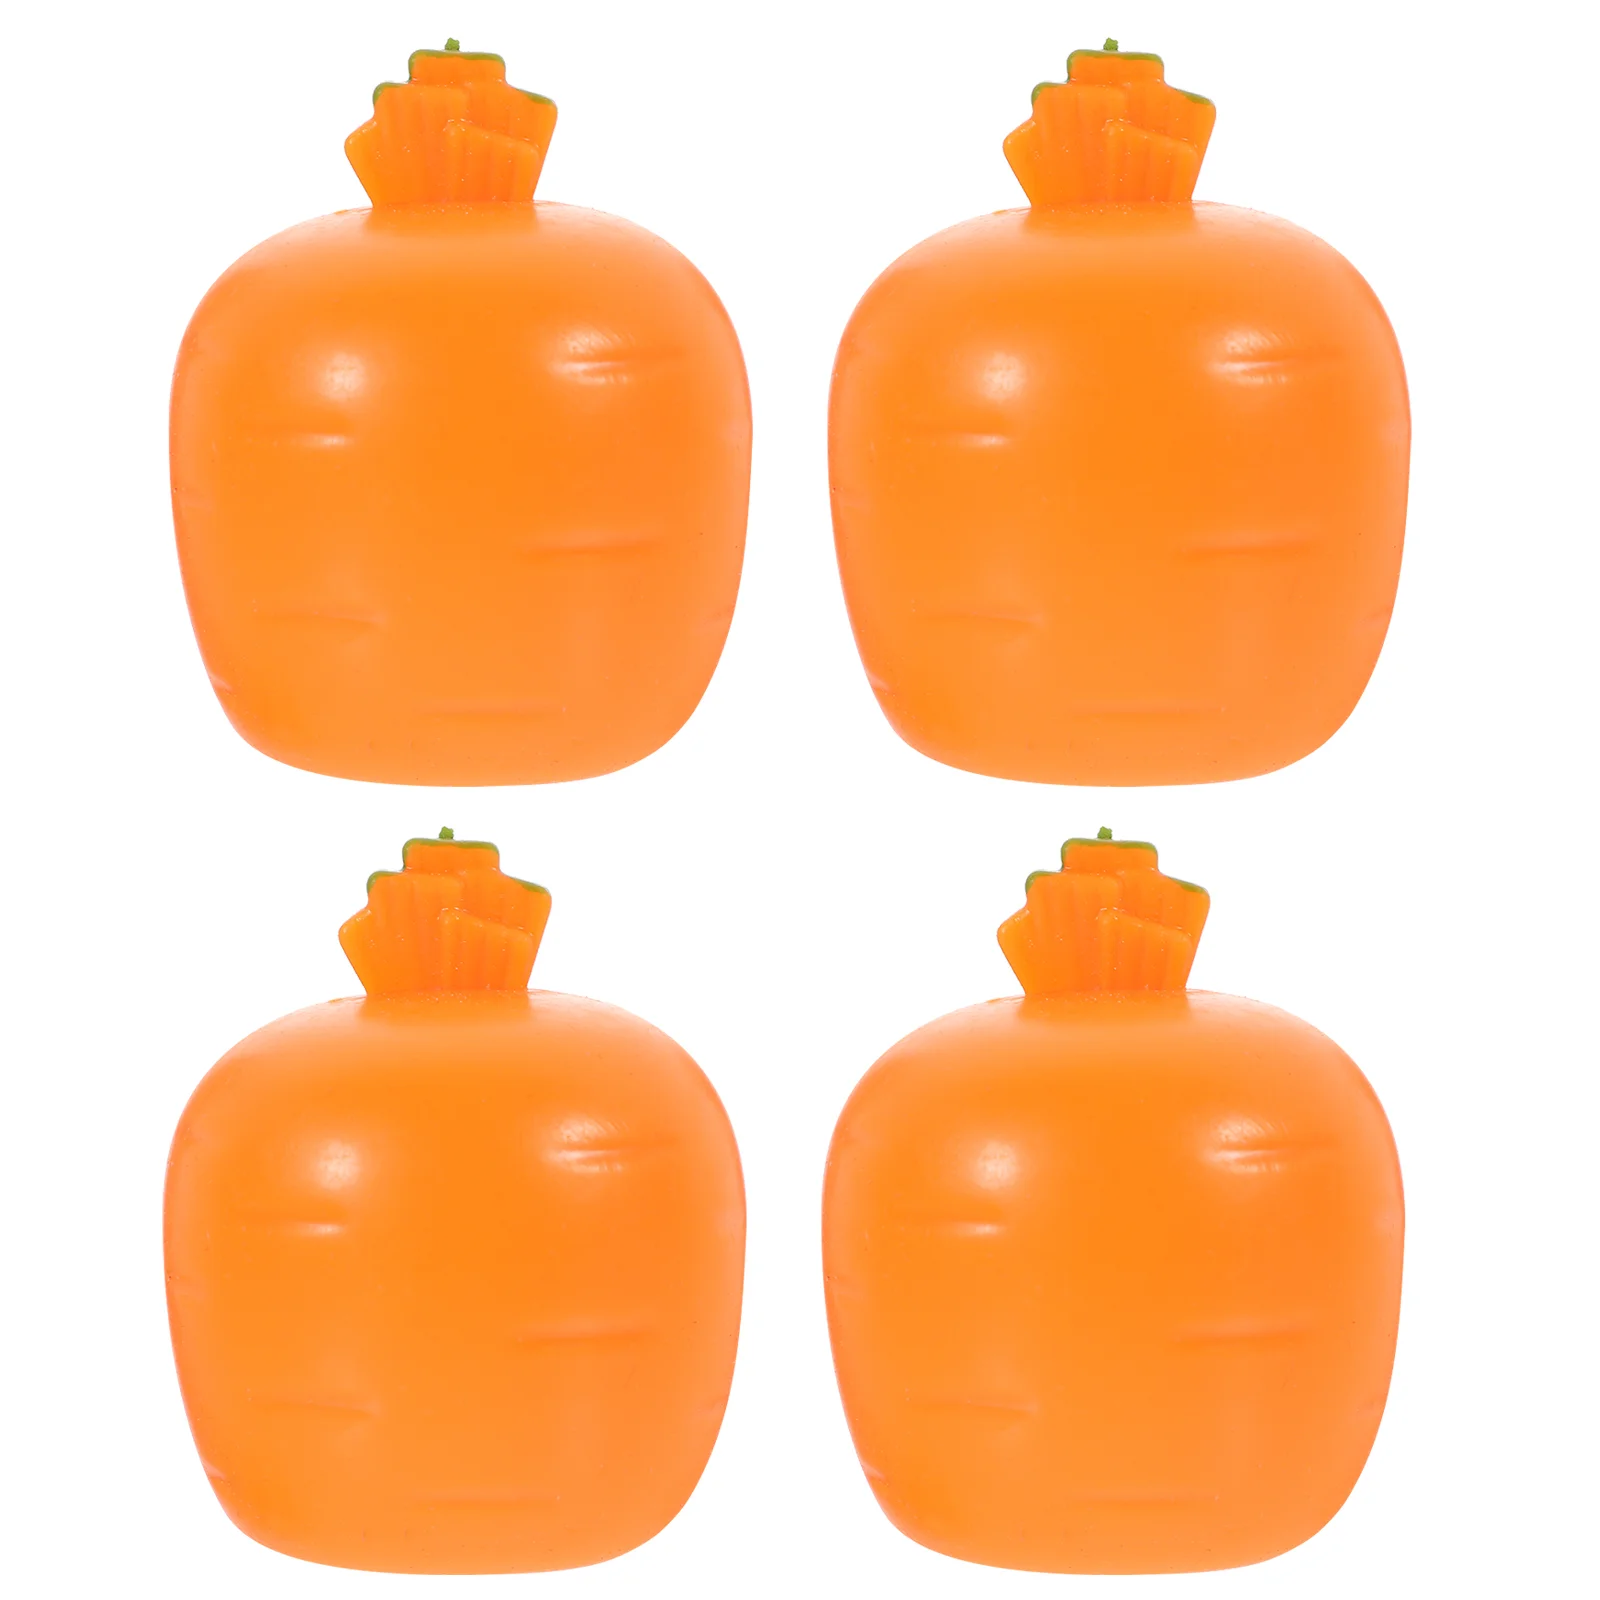 

4 Pcs Carrot Pinch Toys Hand Sensory Cartoon Elastic Pressure Interesting Plastic Compact Squeeze Lovely Anxiety